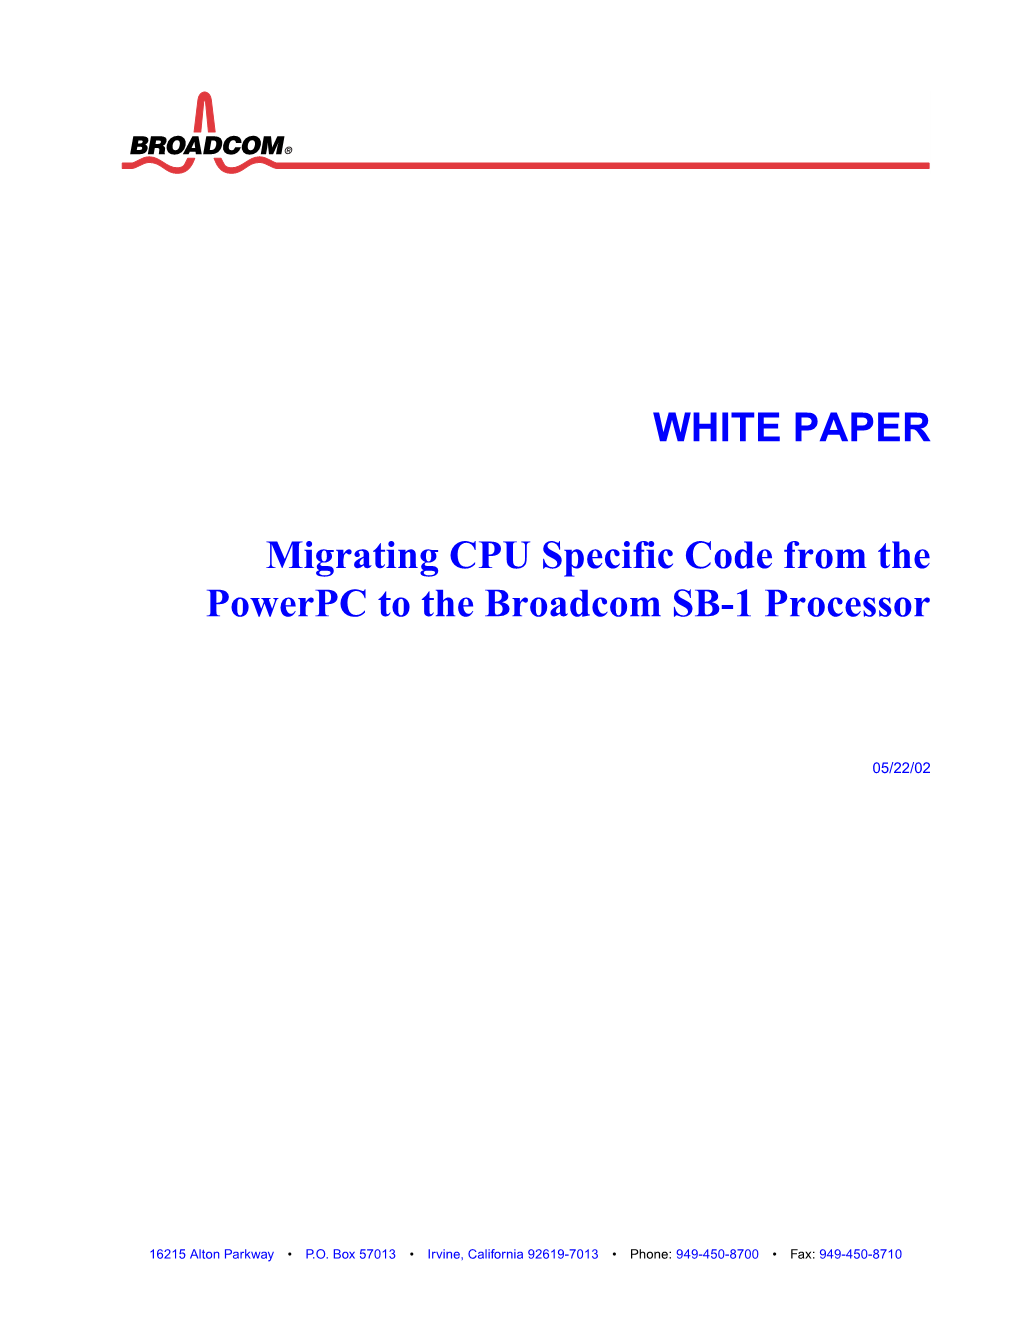 Migrating CPU Specific Code from the Powerpc to the Broadcom SB-1 Processor